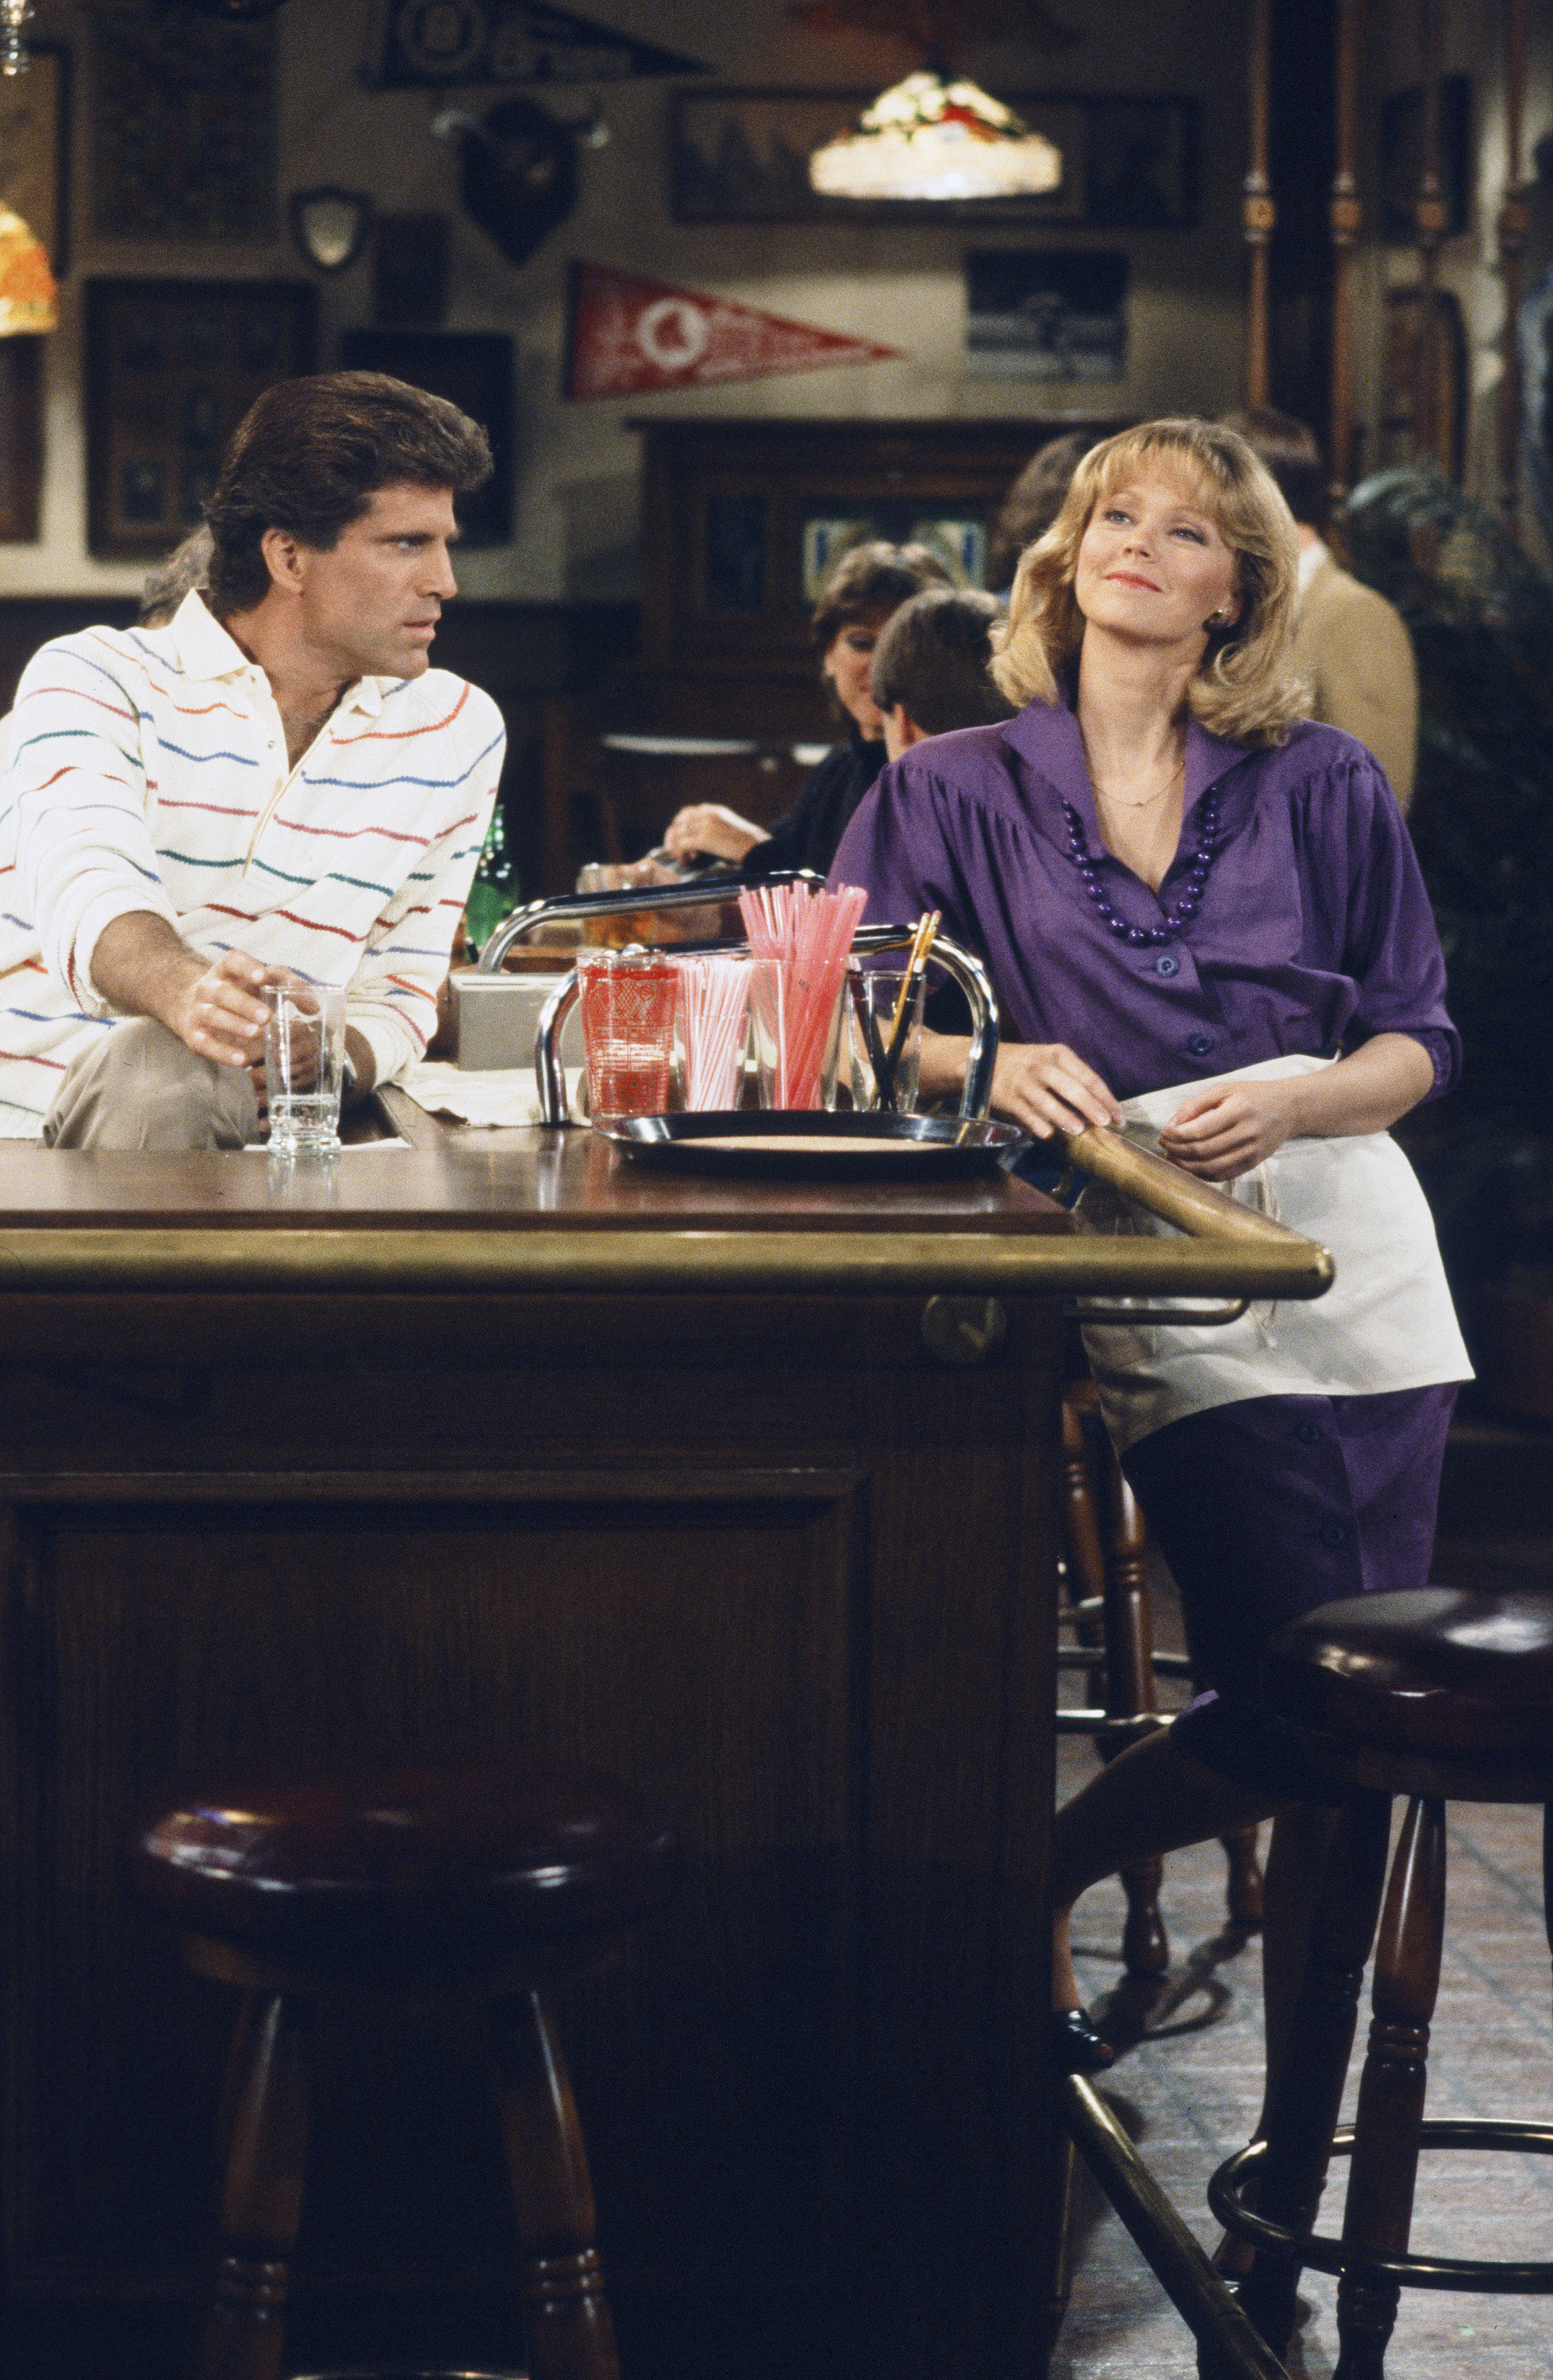 Ted Danson and Shelly Long on "Cheers" in 1983 | Source: Getty Images